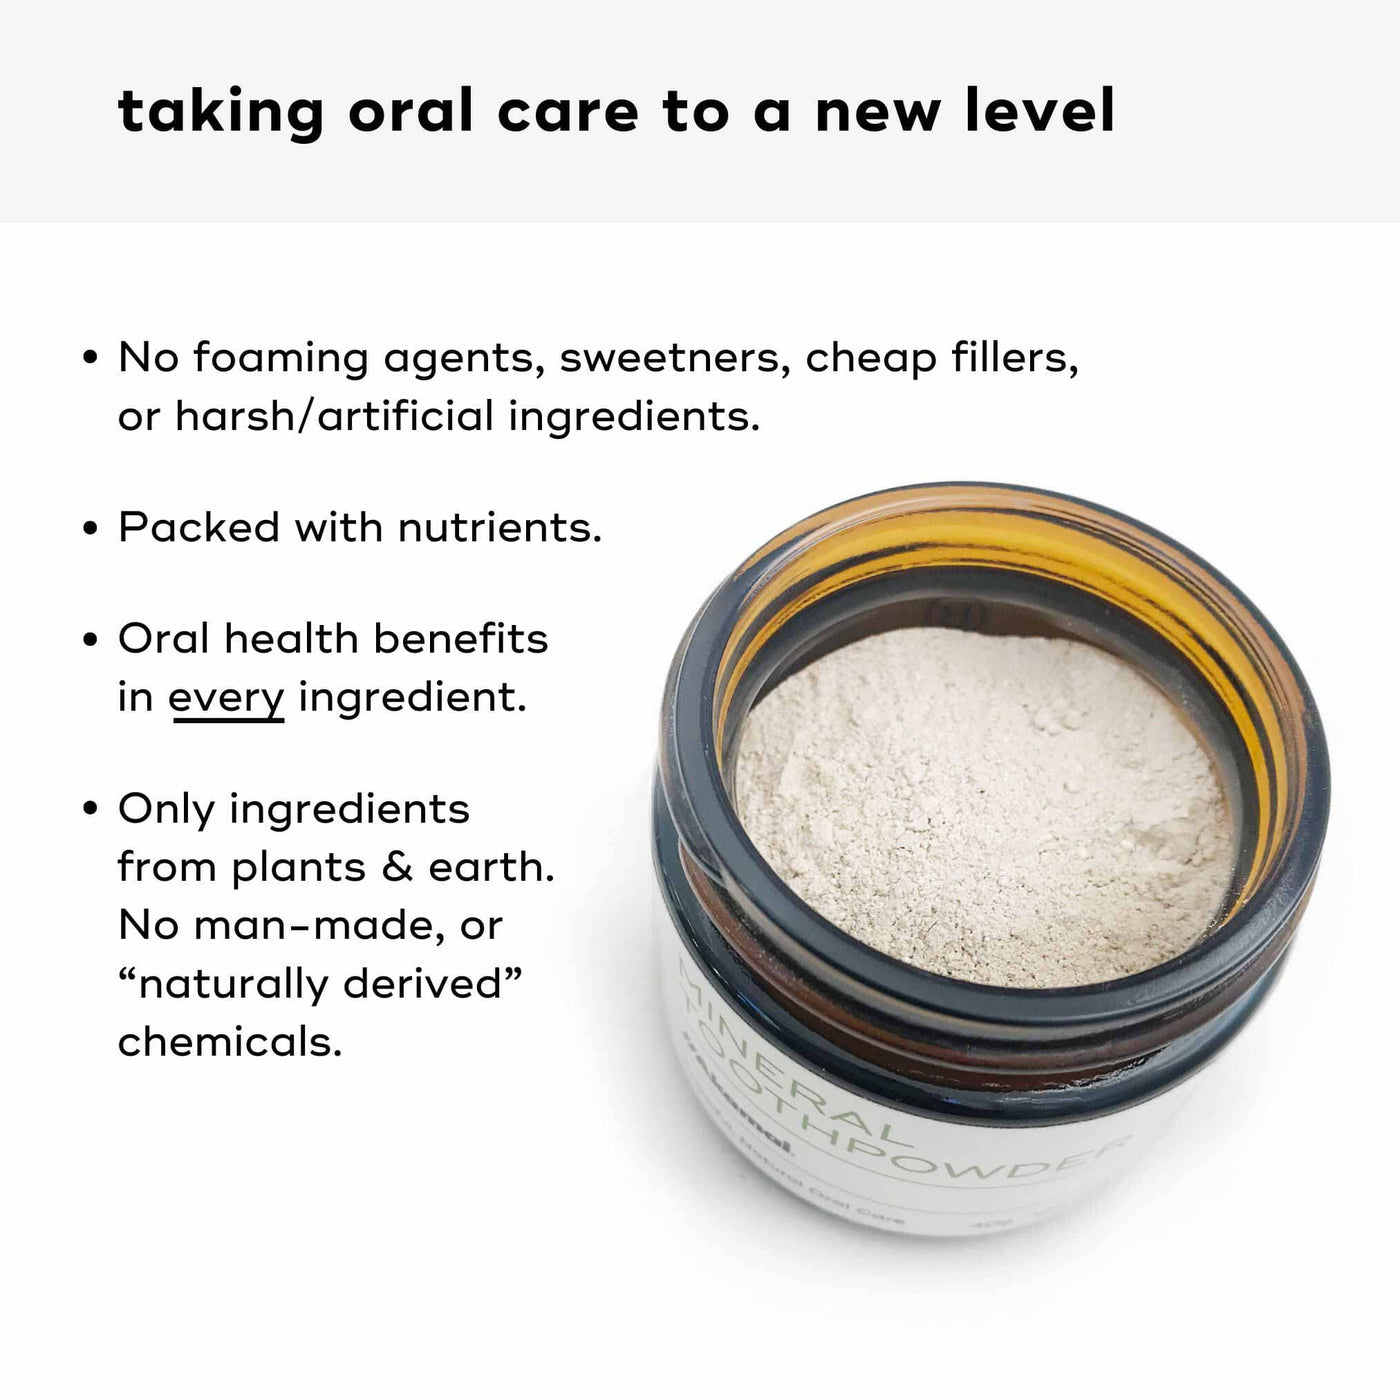 MINERAL TOOTHPOWDER REFILLS Oral Care Akamai 